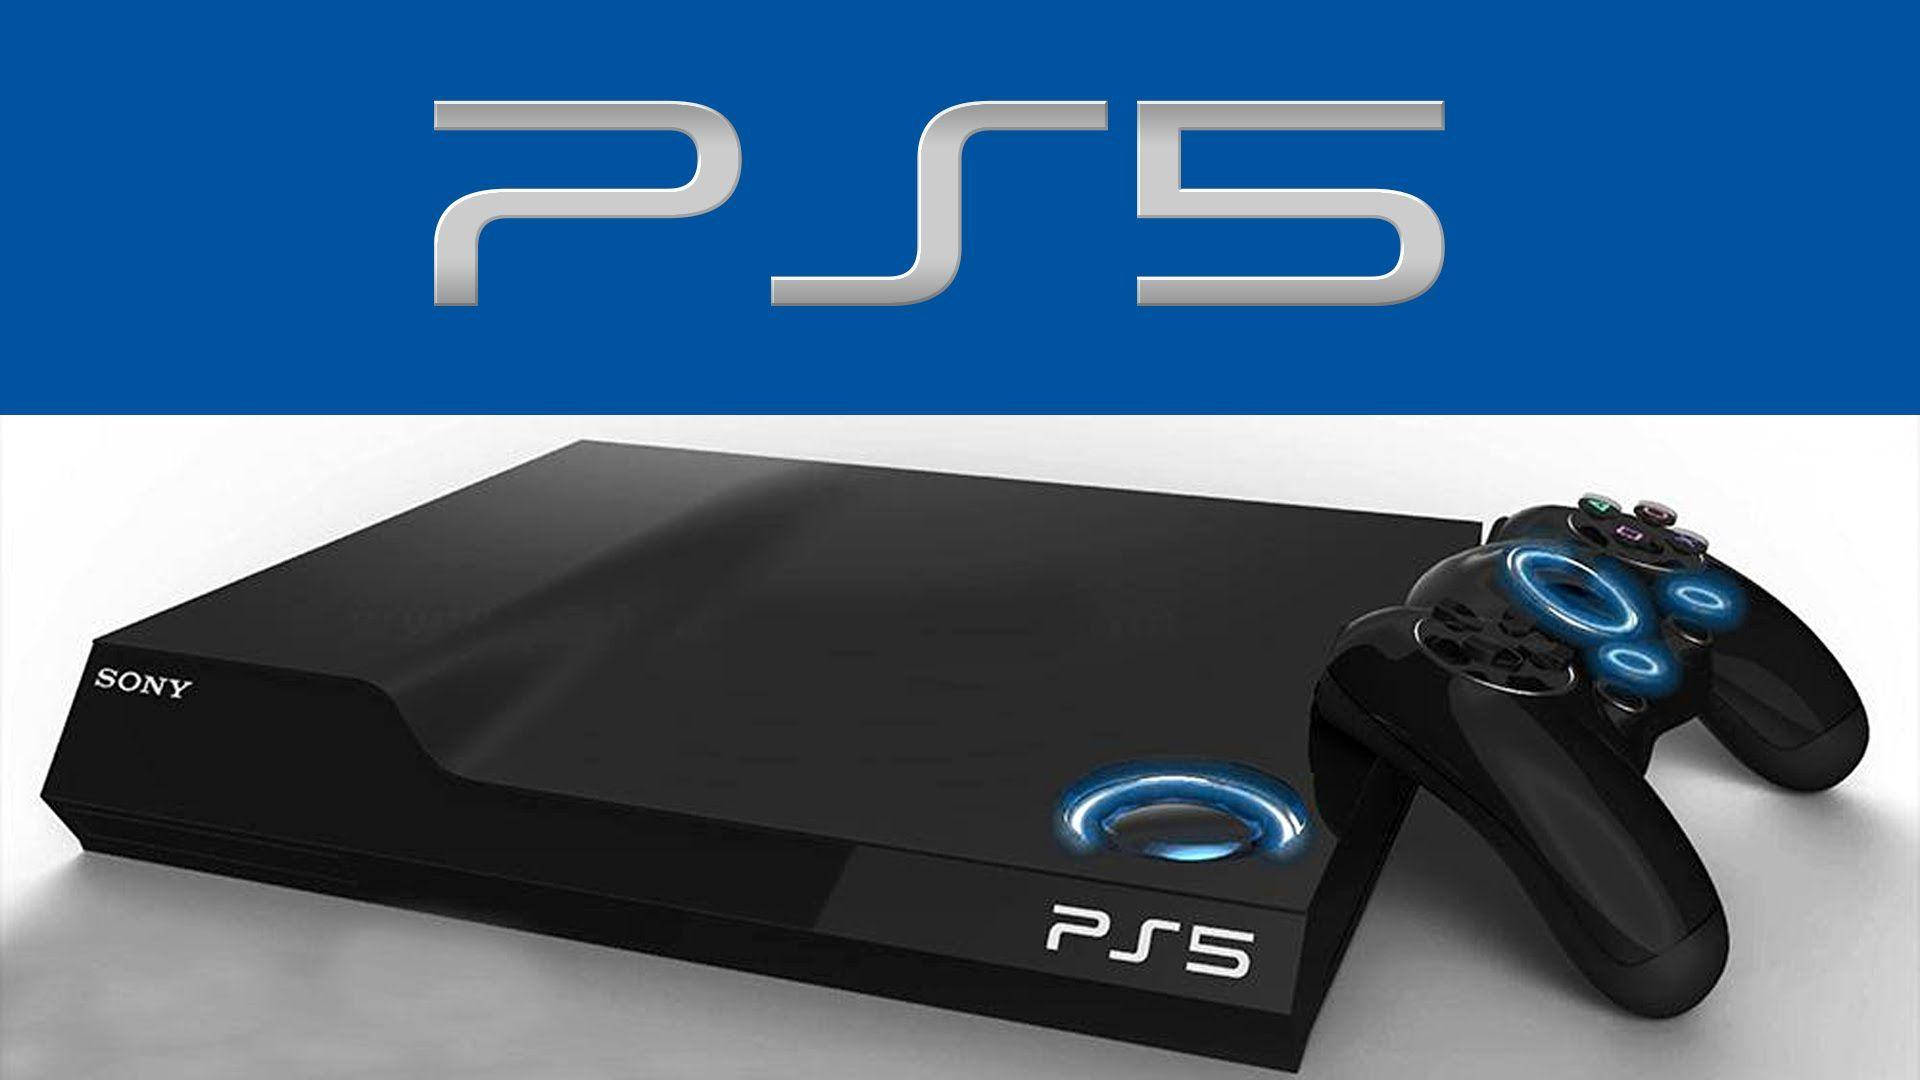 Ps5 Home Video Game Console Background